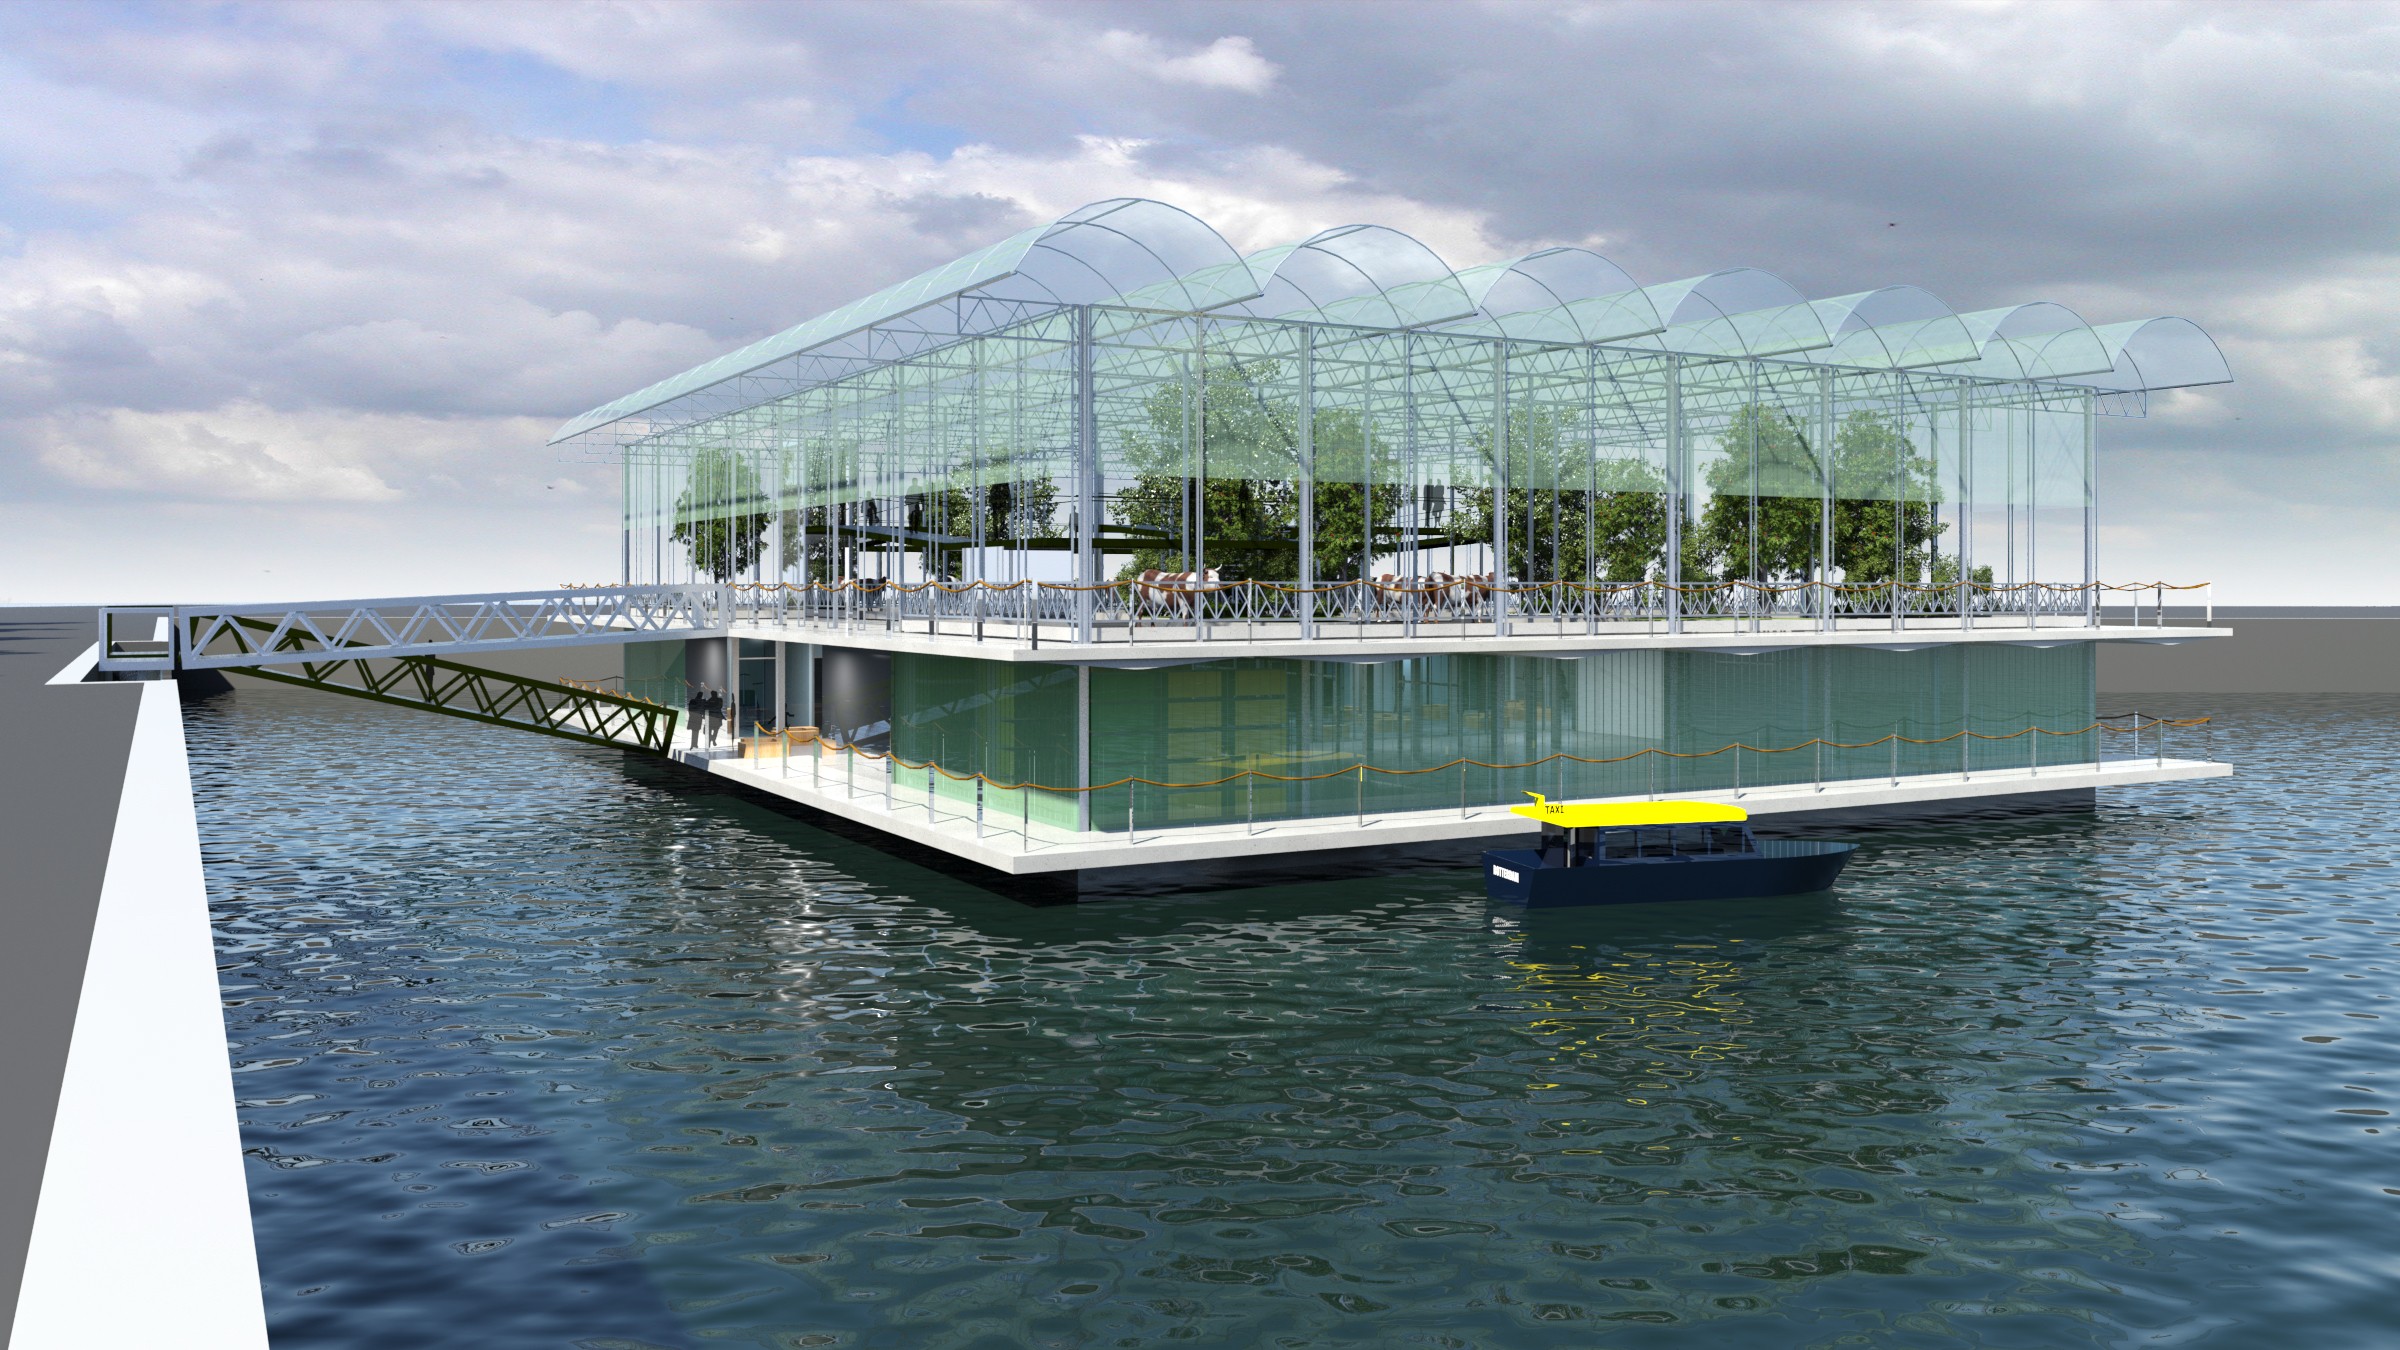 The world’s first floating dairy farm will open in Rotterdam by the end of 2018.